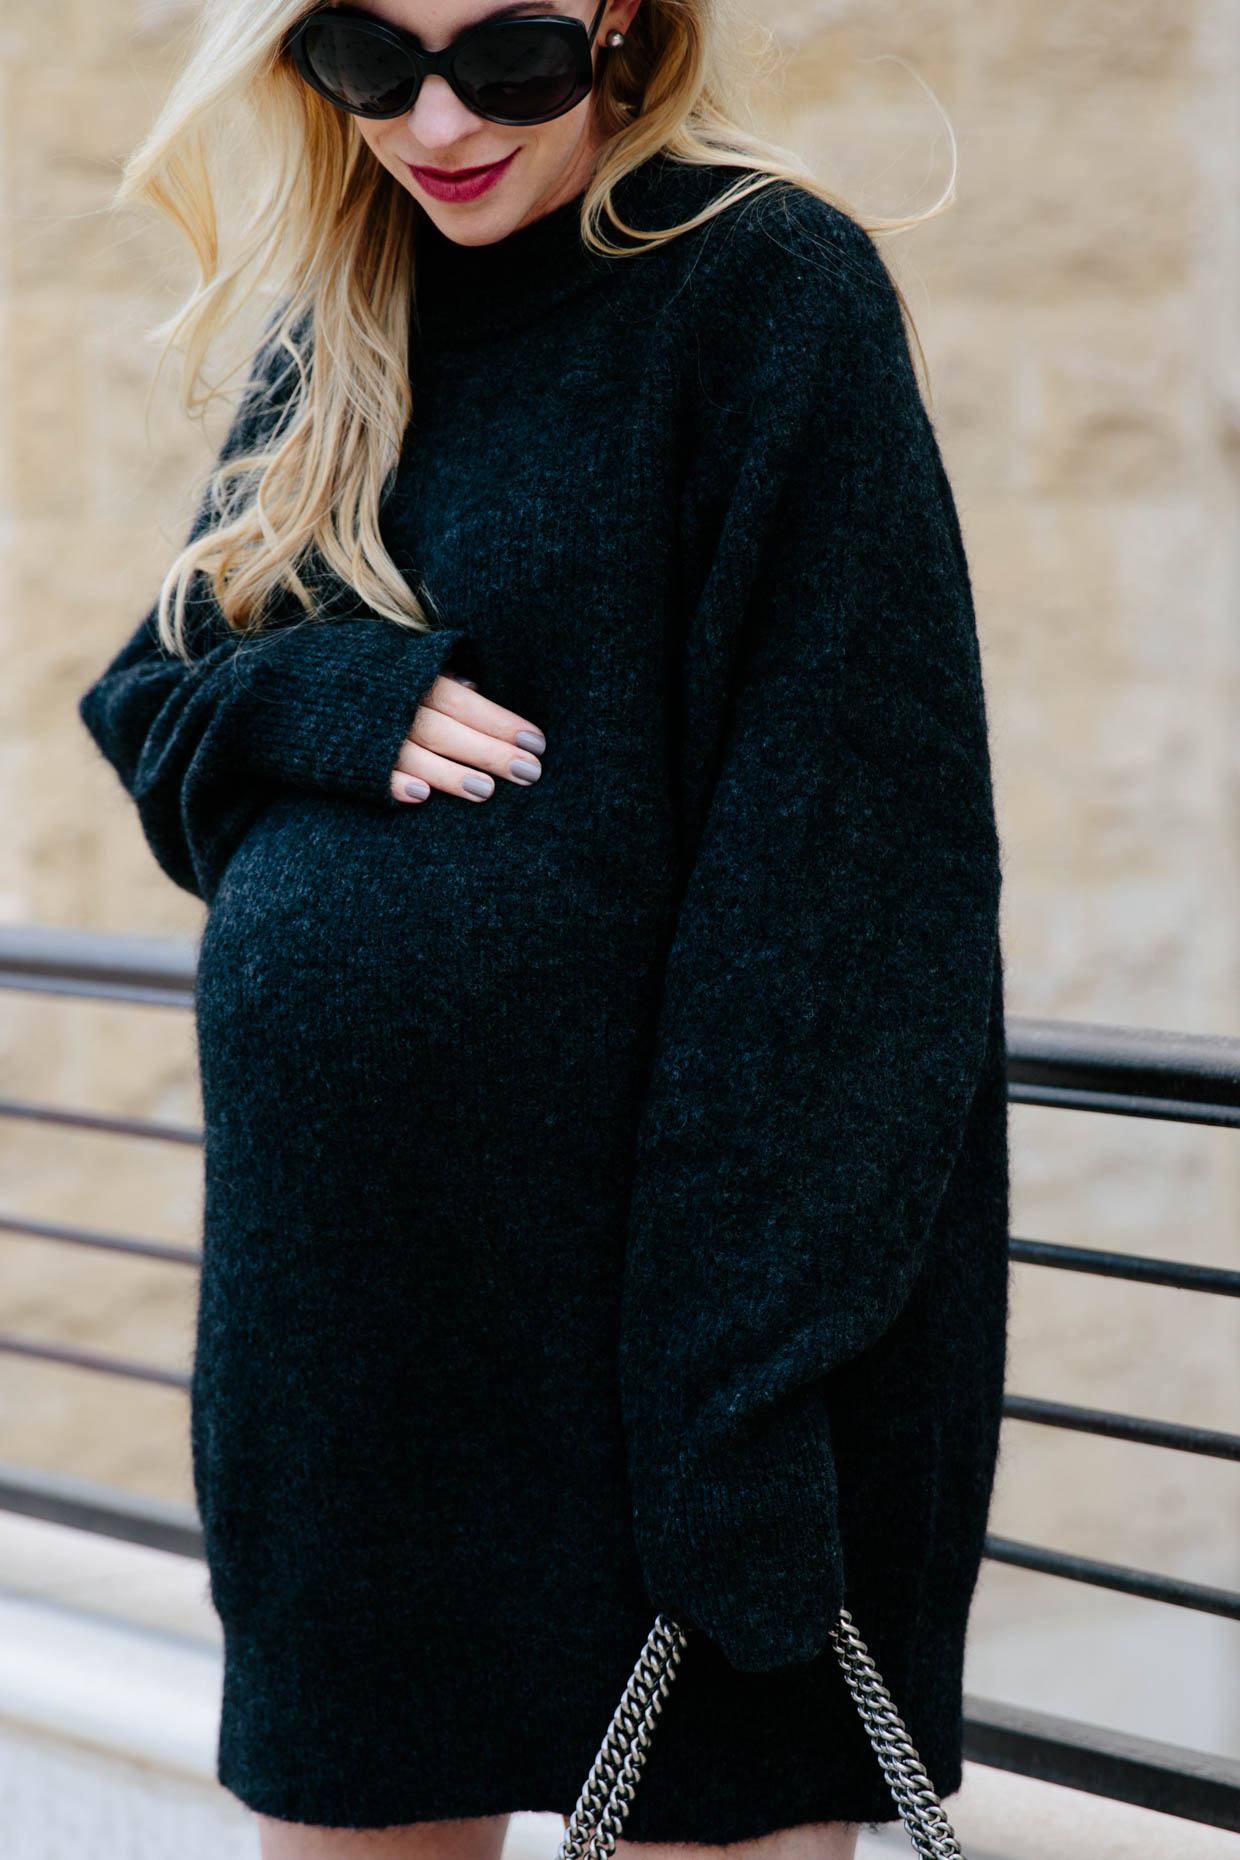 How to wear an oversized sweater dress for stylish maternity outfit,  maternity outfit ideas with cozy sweater dress - Meagan's Moda